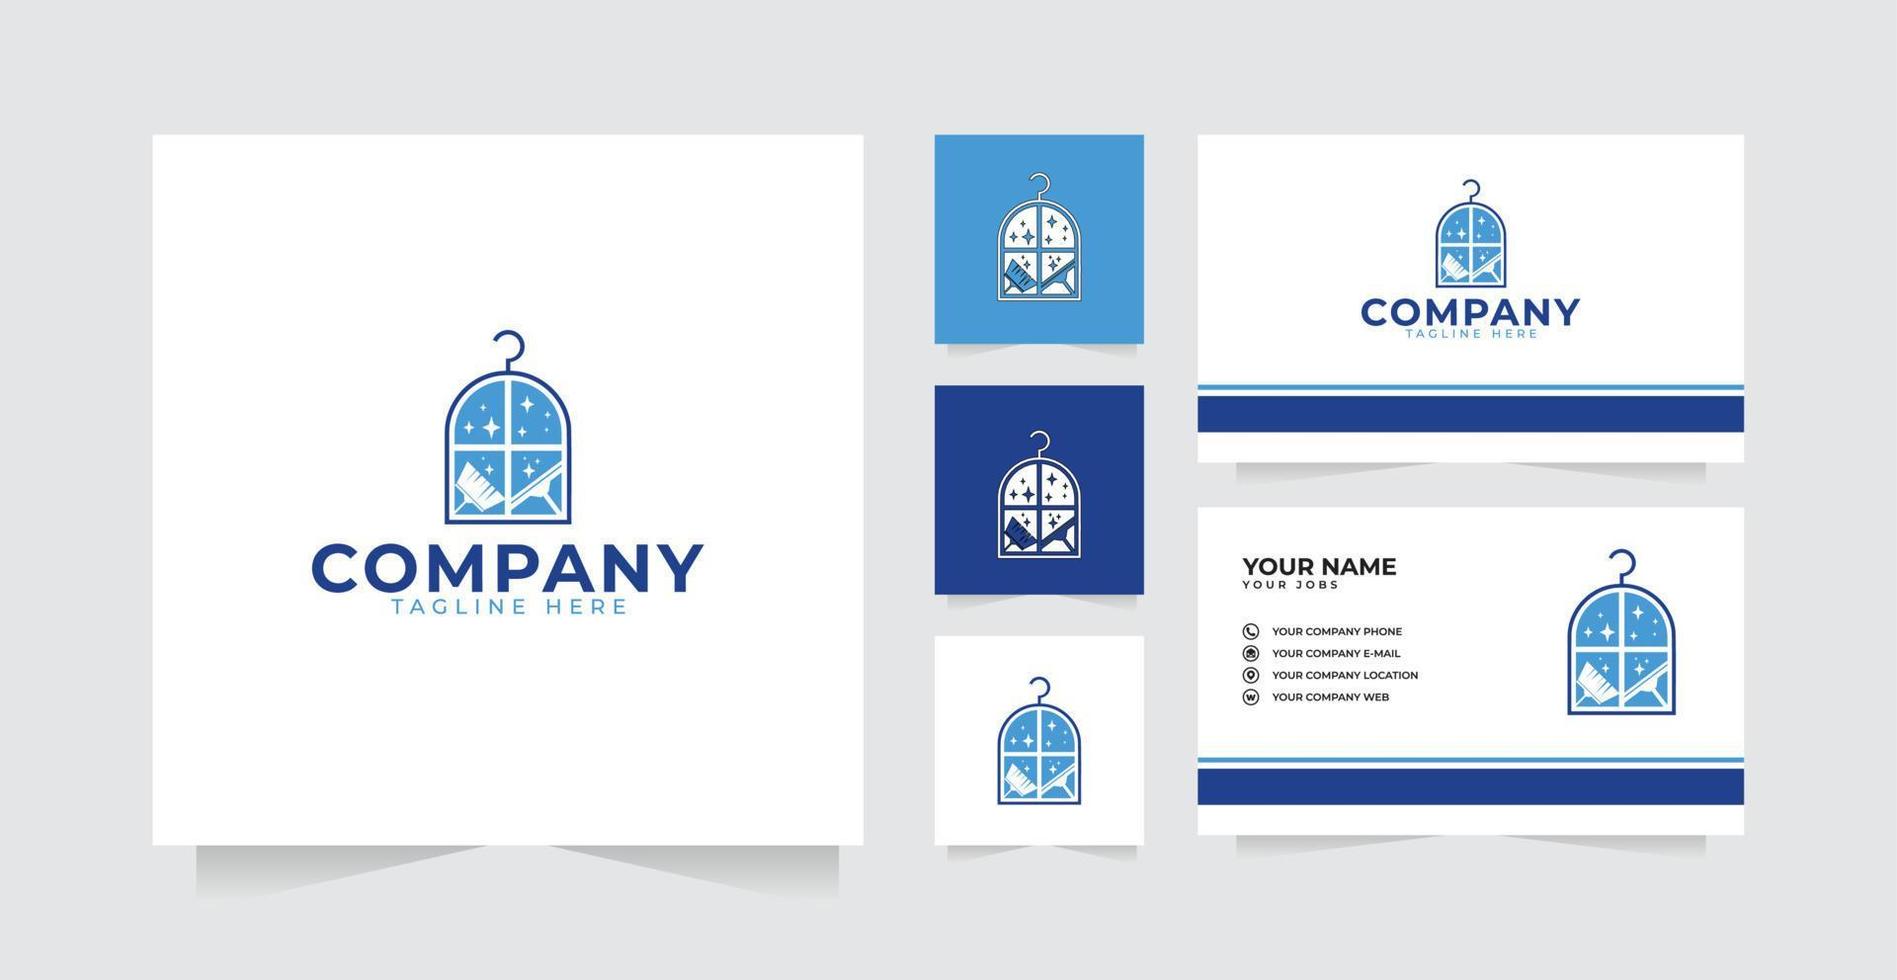 Washing or cleaning home logo design inspiration and business card vector